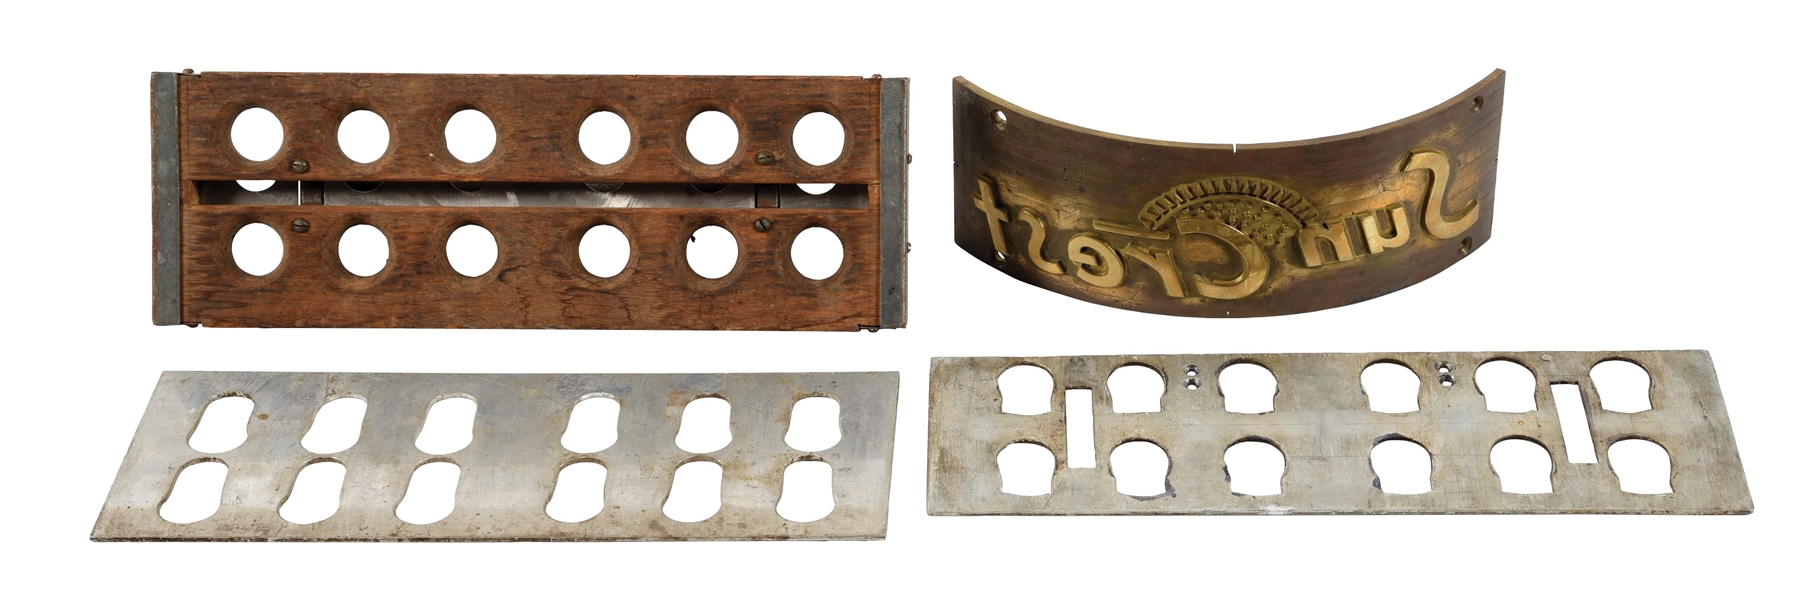 SUN CREST COLA BRASS PLATE AND BOTTLE HOLDERS.